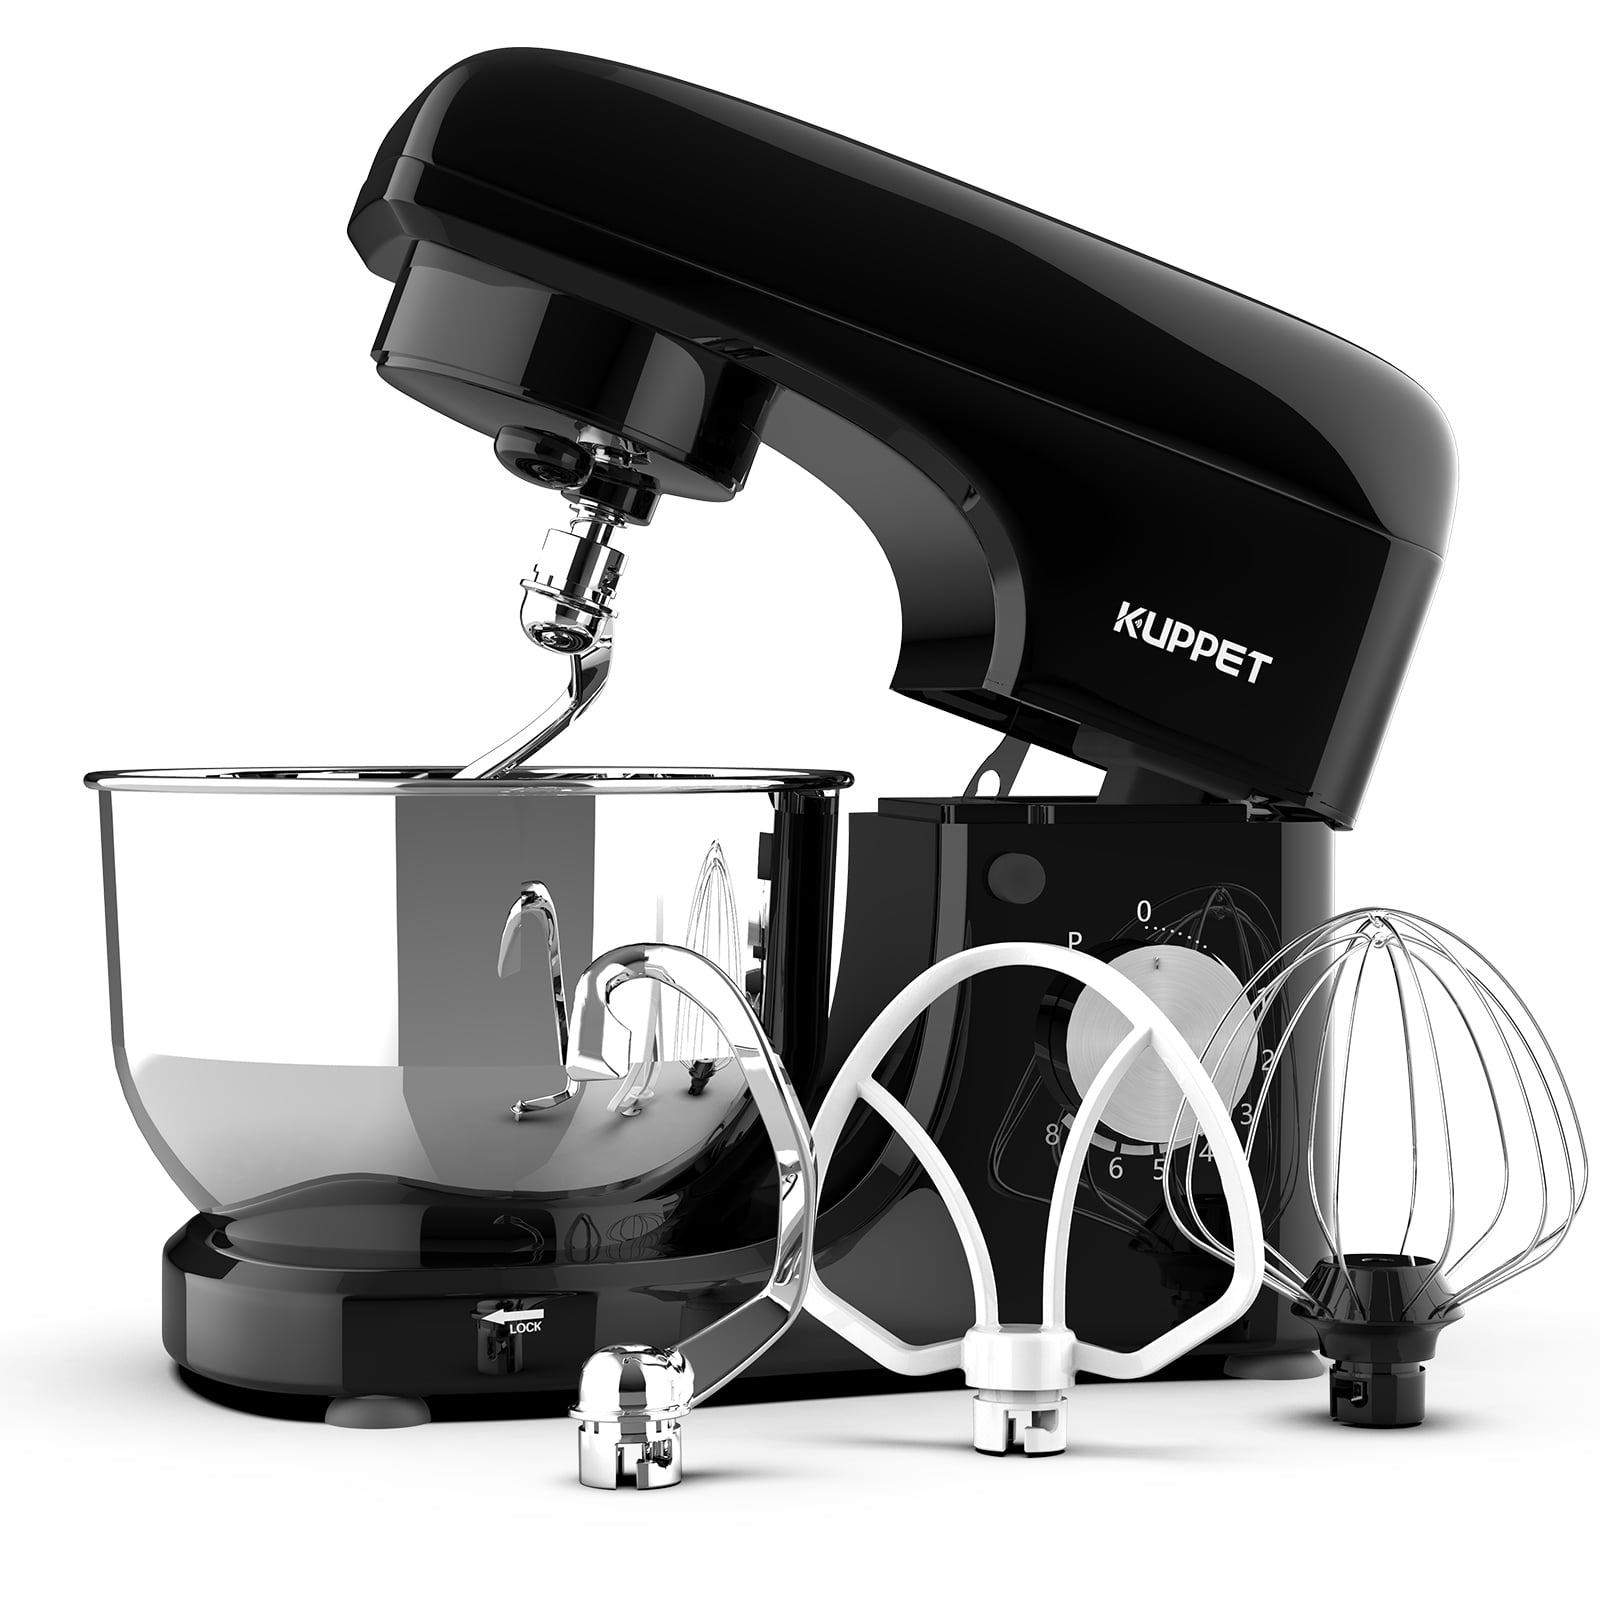 Mondawe 4.8-Quart 8-Speed Black Residential Stand Mixer in the